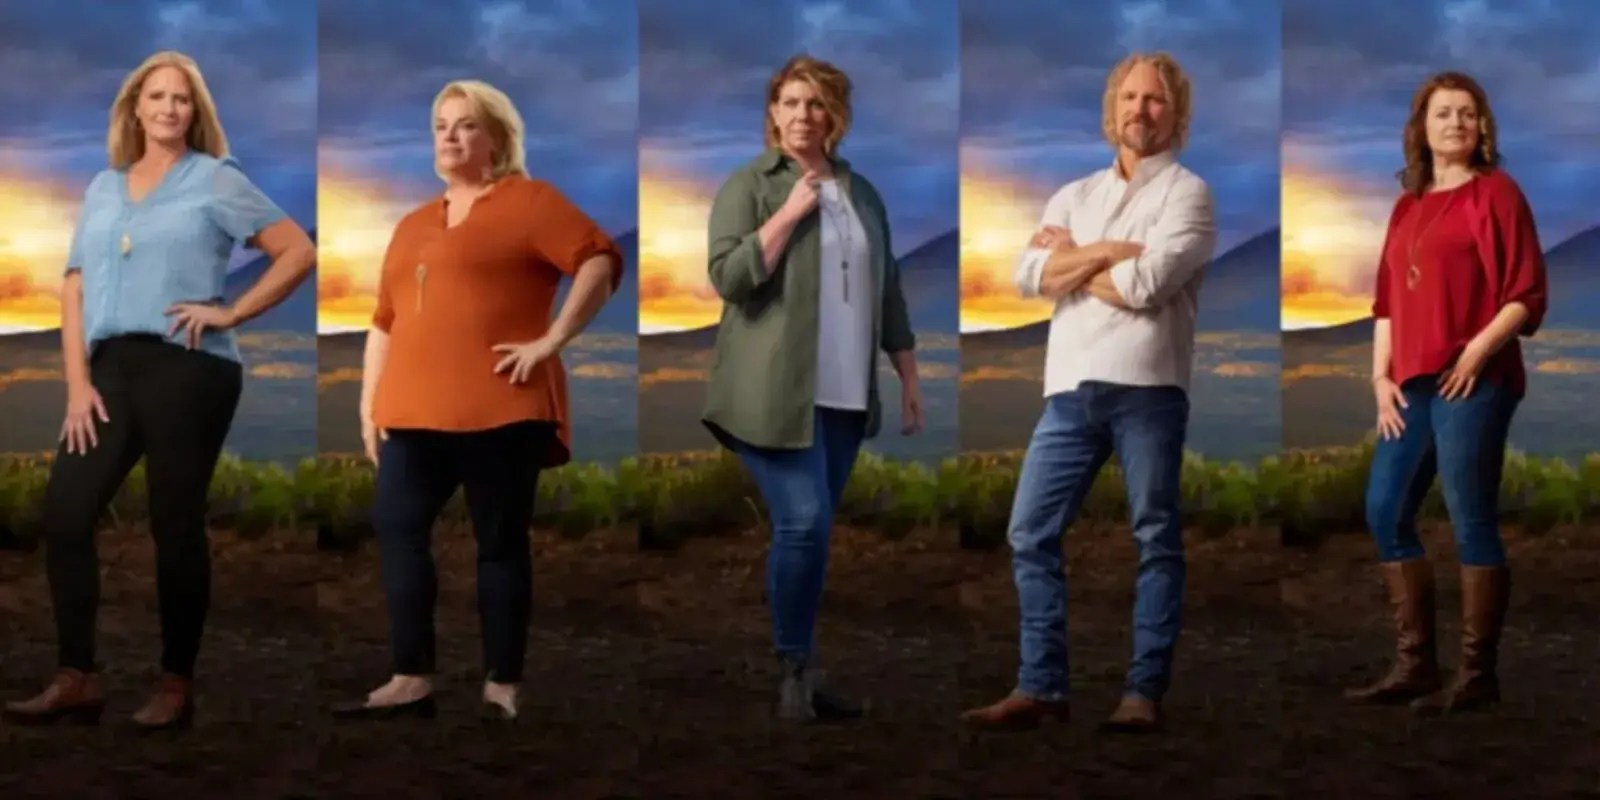 'Sister Wives' cast season 18 includes Christine, Janelle, Meri, Kody, and Robyn Brown.